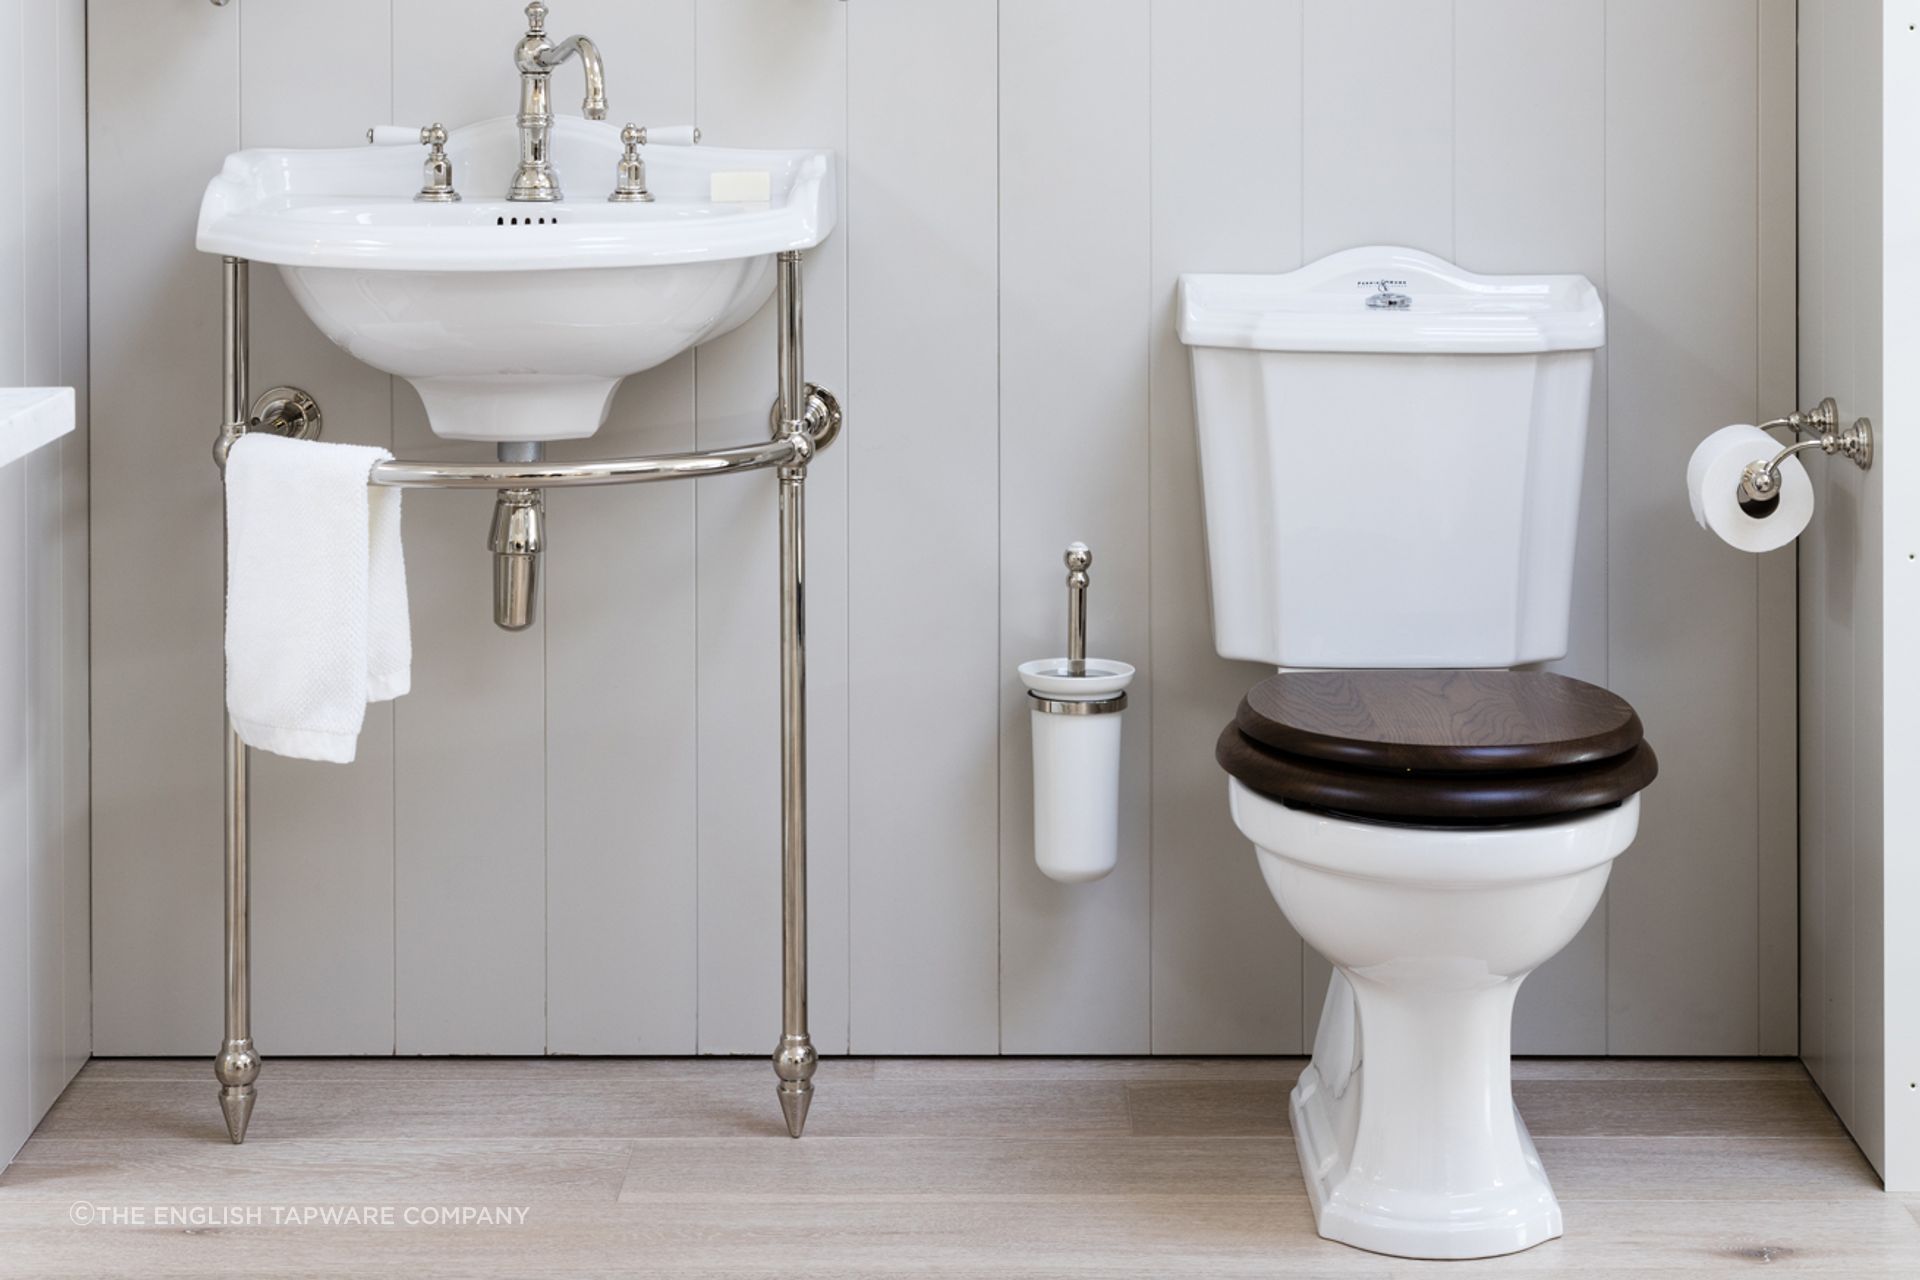 Traditional toilet design is on show in this bathroom with the Perrin &amp; Rowe Edwardian Toilet